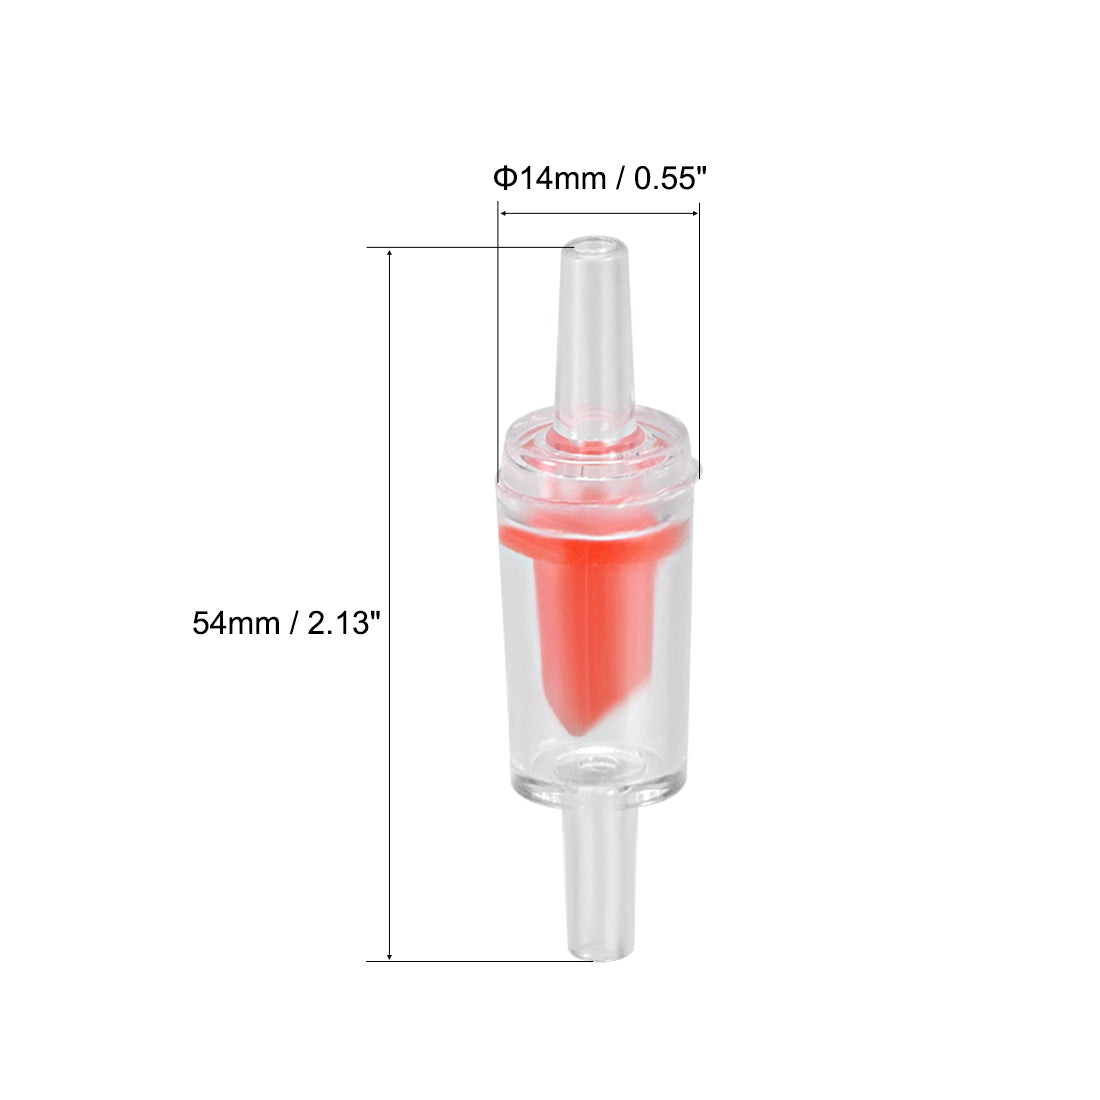 uxcell Uxcell Aquarium Air Pump Check Valves Red Clear Plastic One Way Non-Return Check Valve for Fish Tank 6Pcs